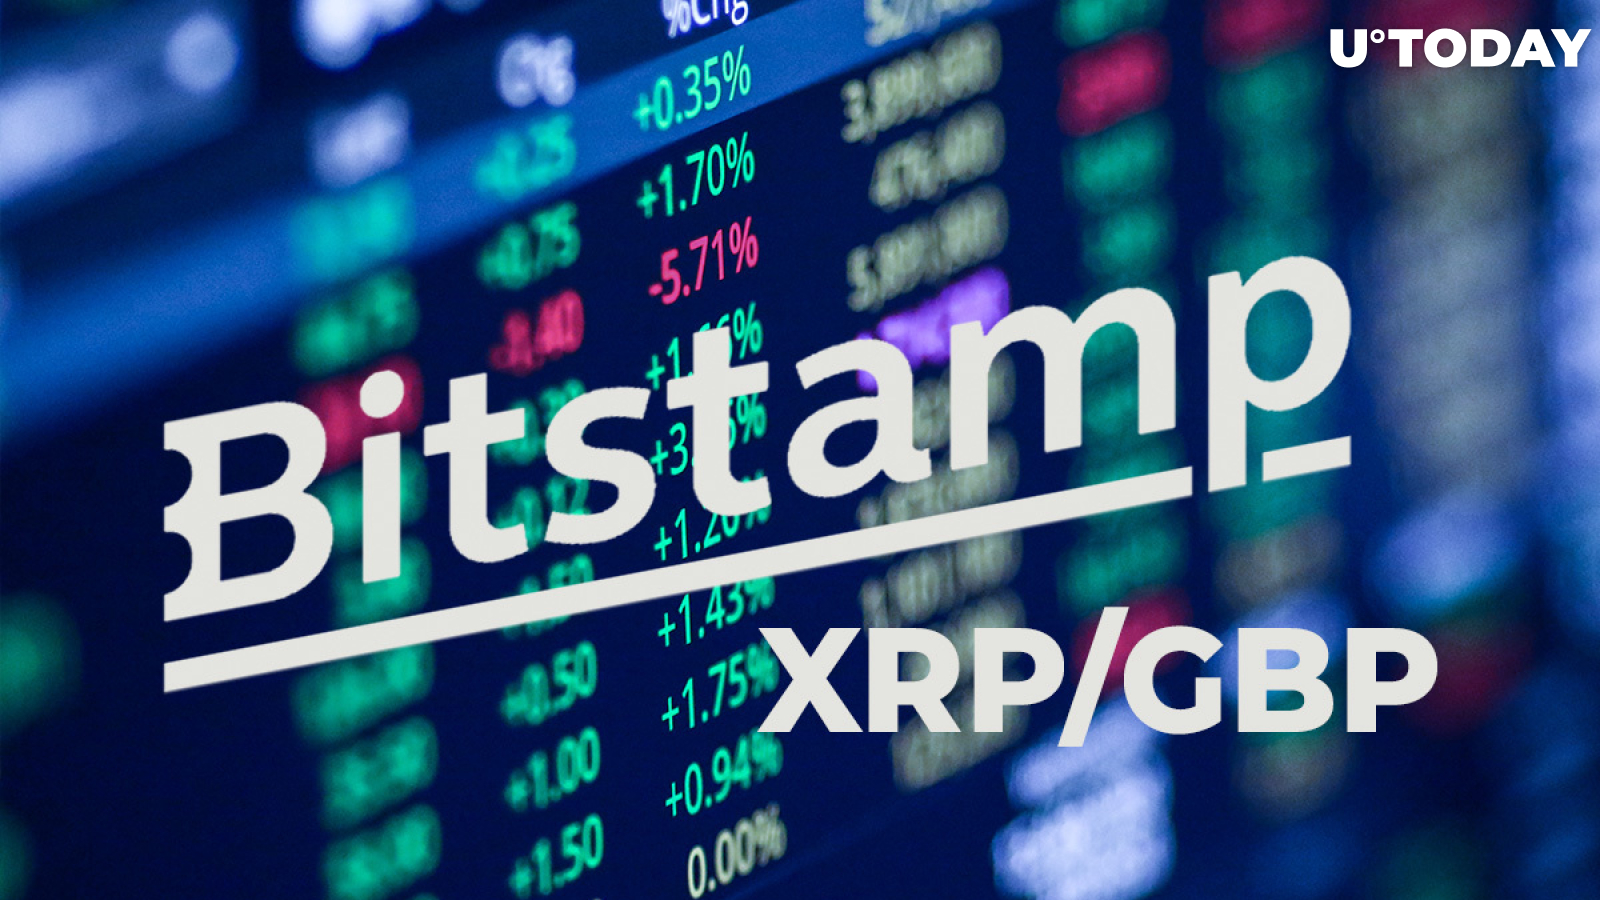 XRP/GBP Goes Live on Bitstamp Exchange. Support for Stellar (XLM) Coming Soon